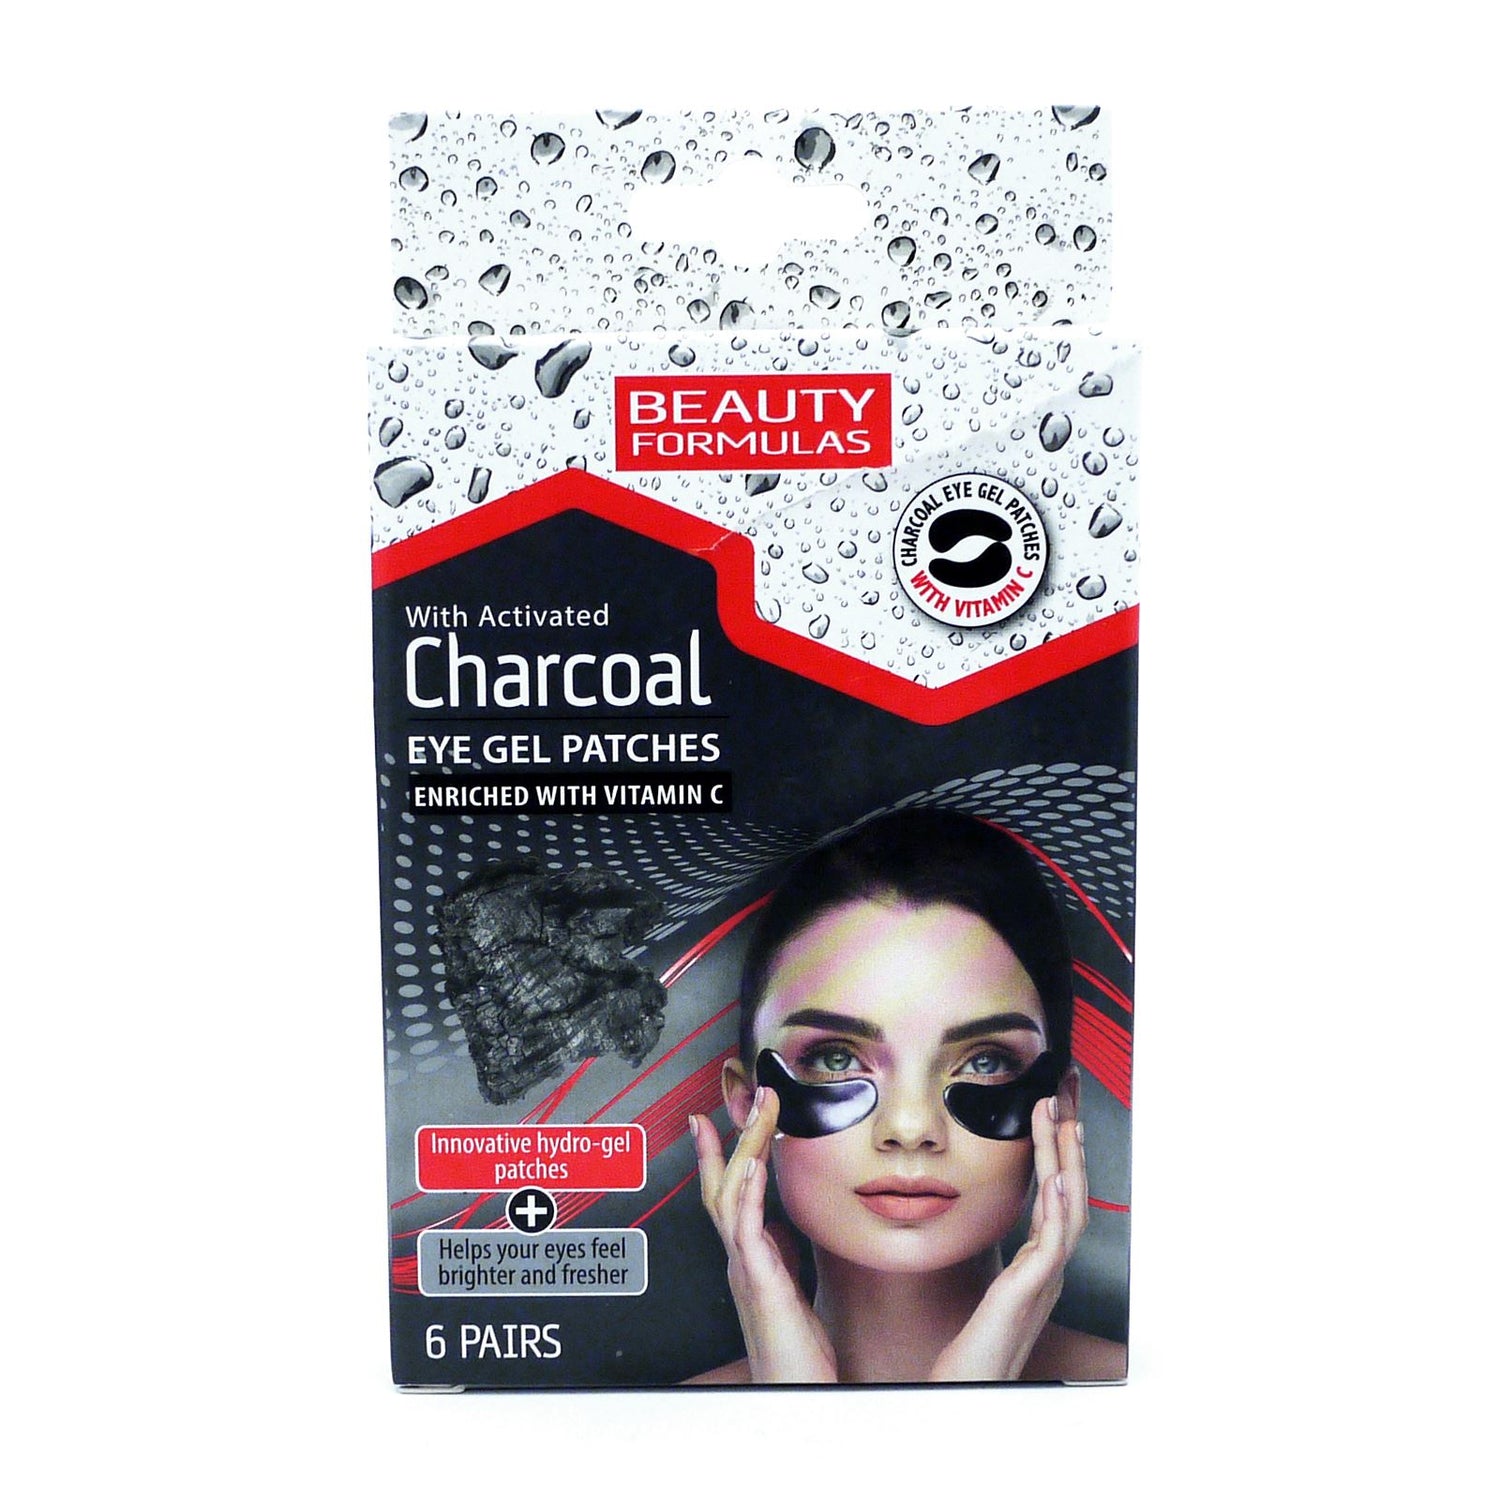 Beauty Formulas Charcoal Eye Gel Patches (6 Pairs)